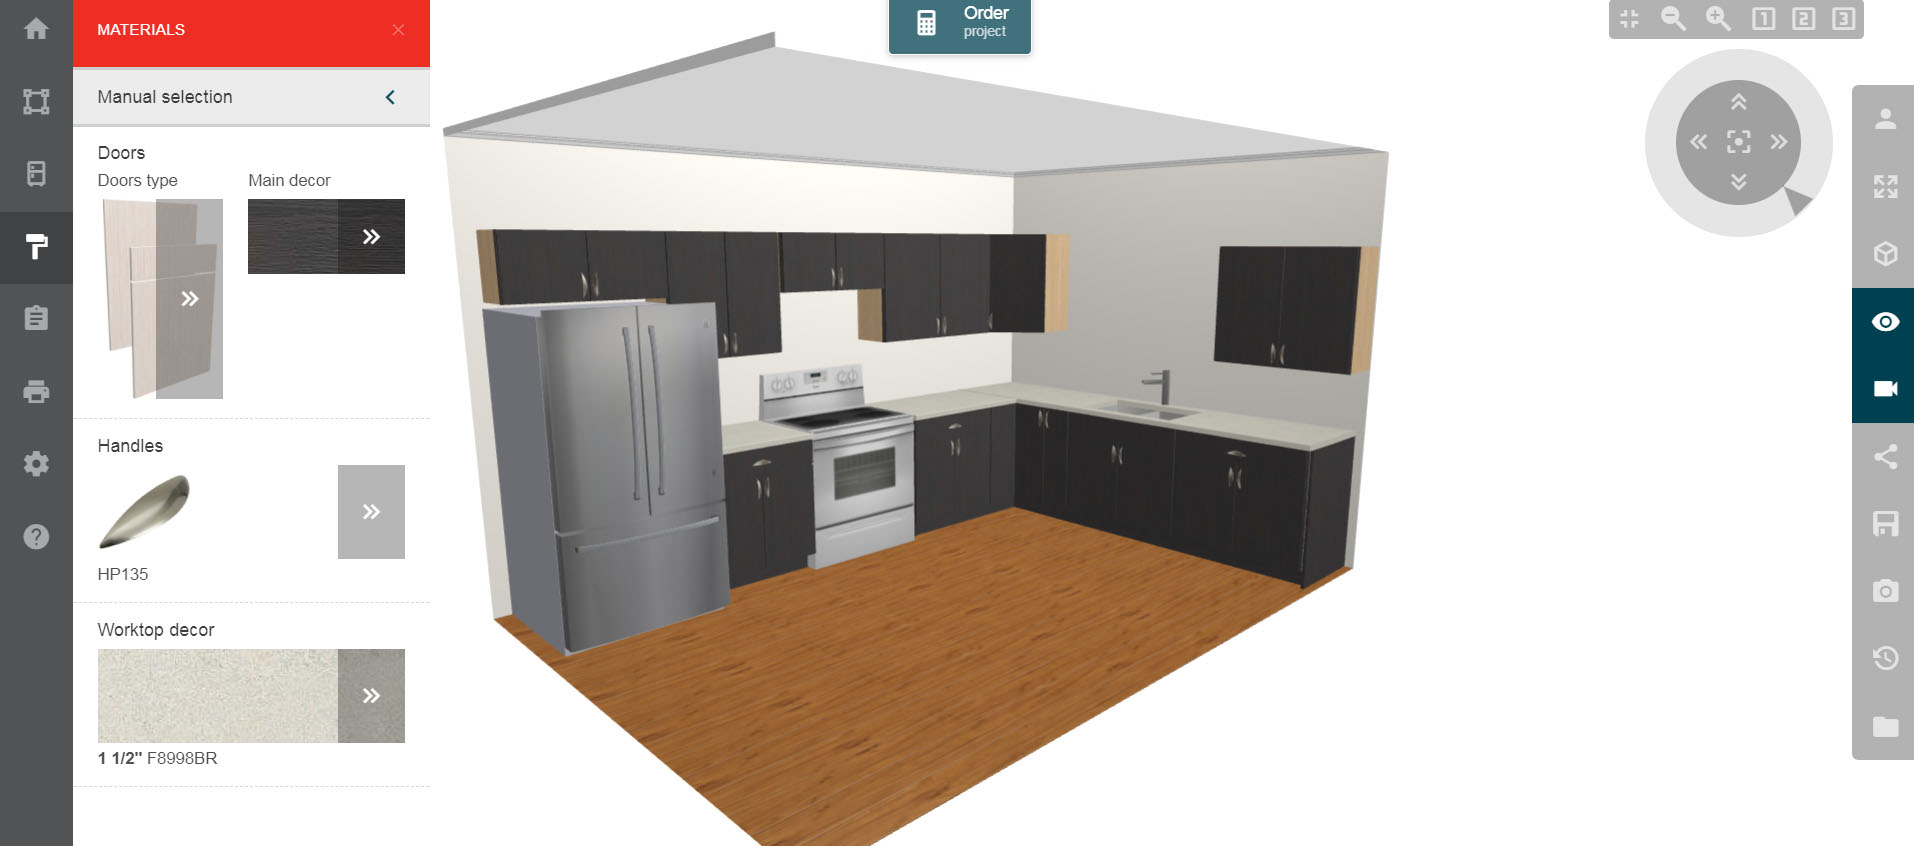 Merillat Kitchen Planner Where do you need the kitchen designers? merillat kitchen planner